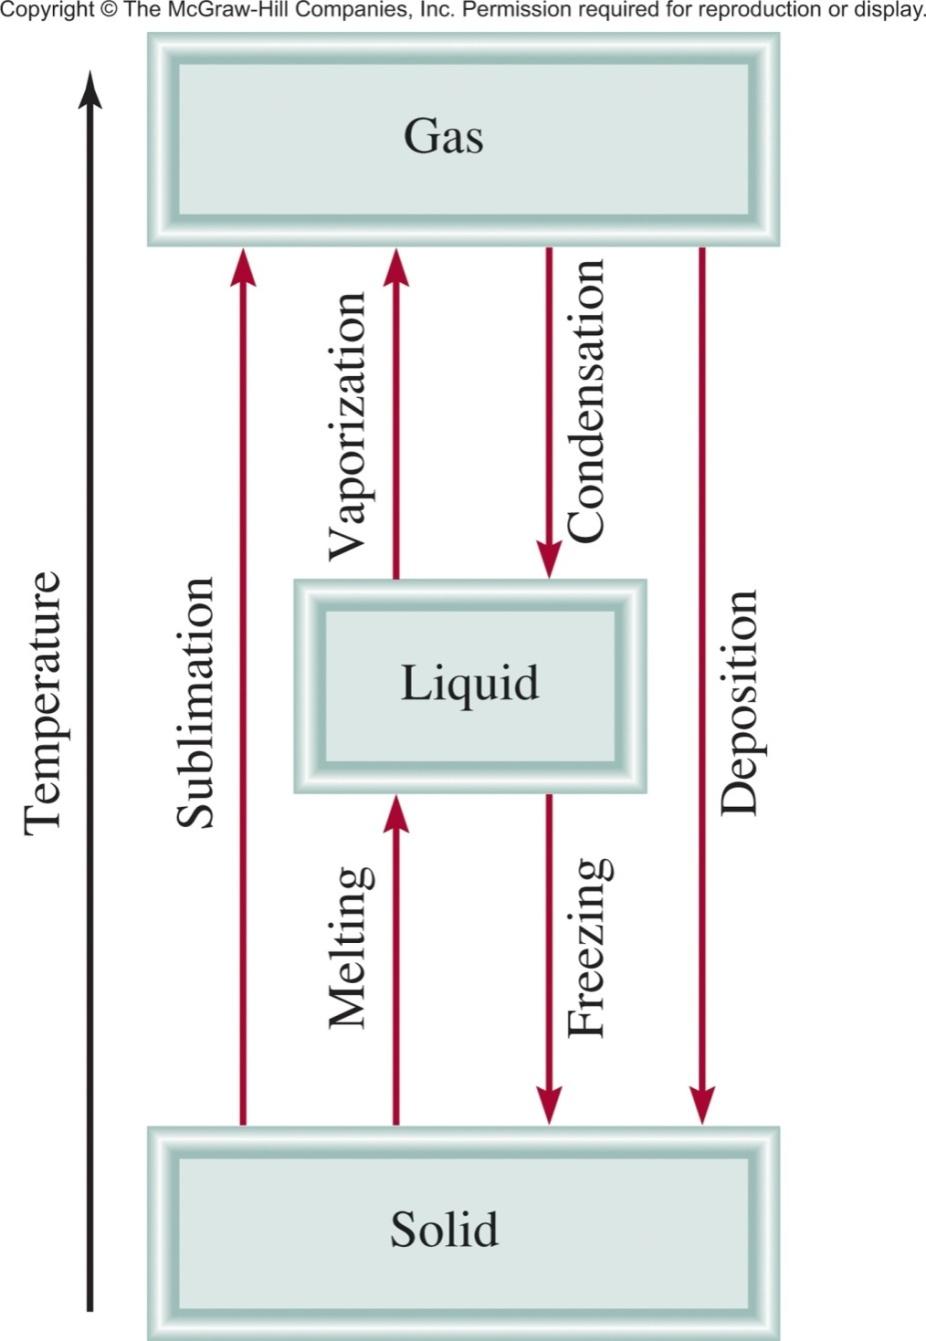 Liquid-Solid Equilibrium Melting point of solid /freezing point of a liquid: A liquid is the temperature at which solid and liquid